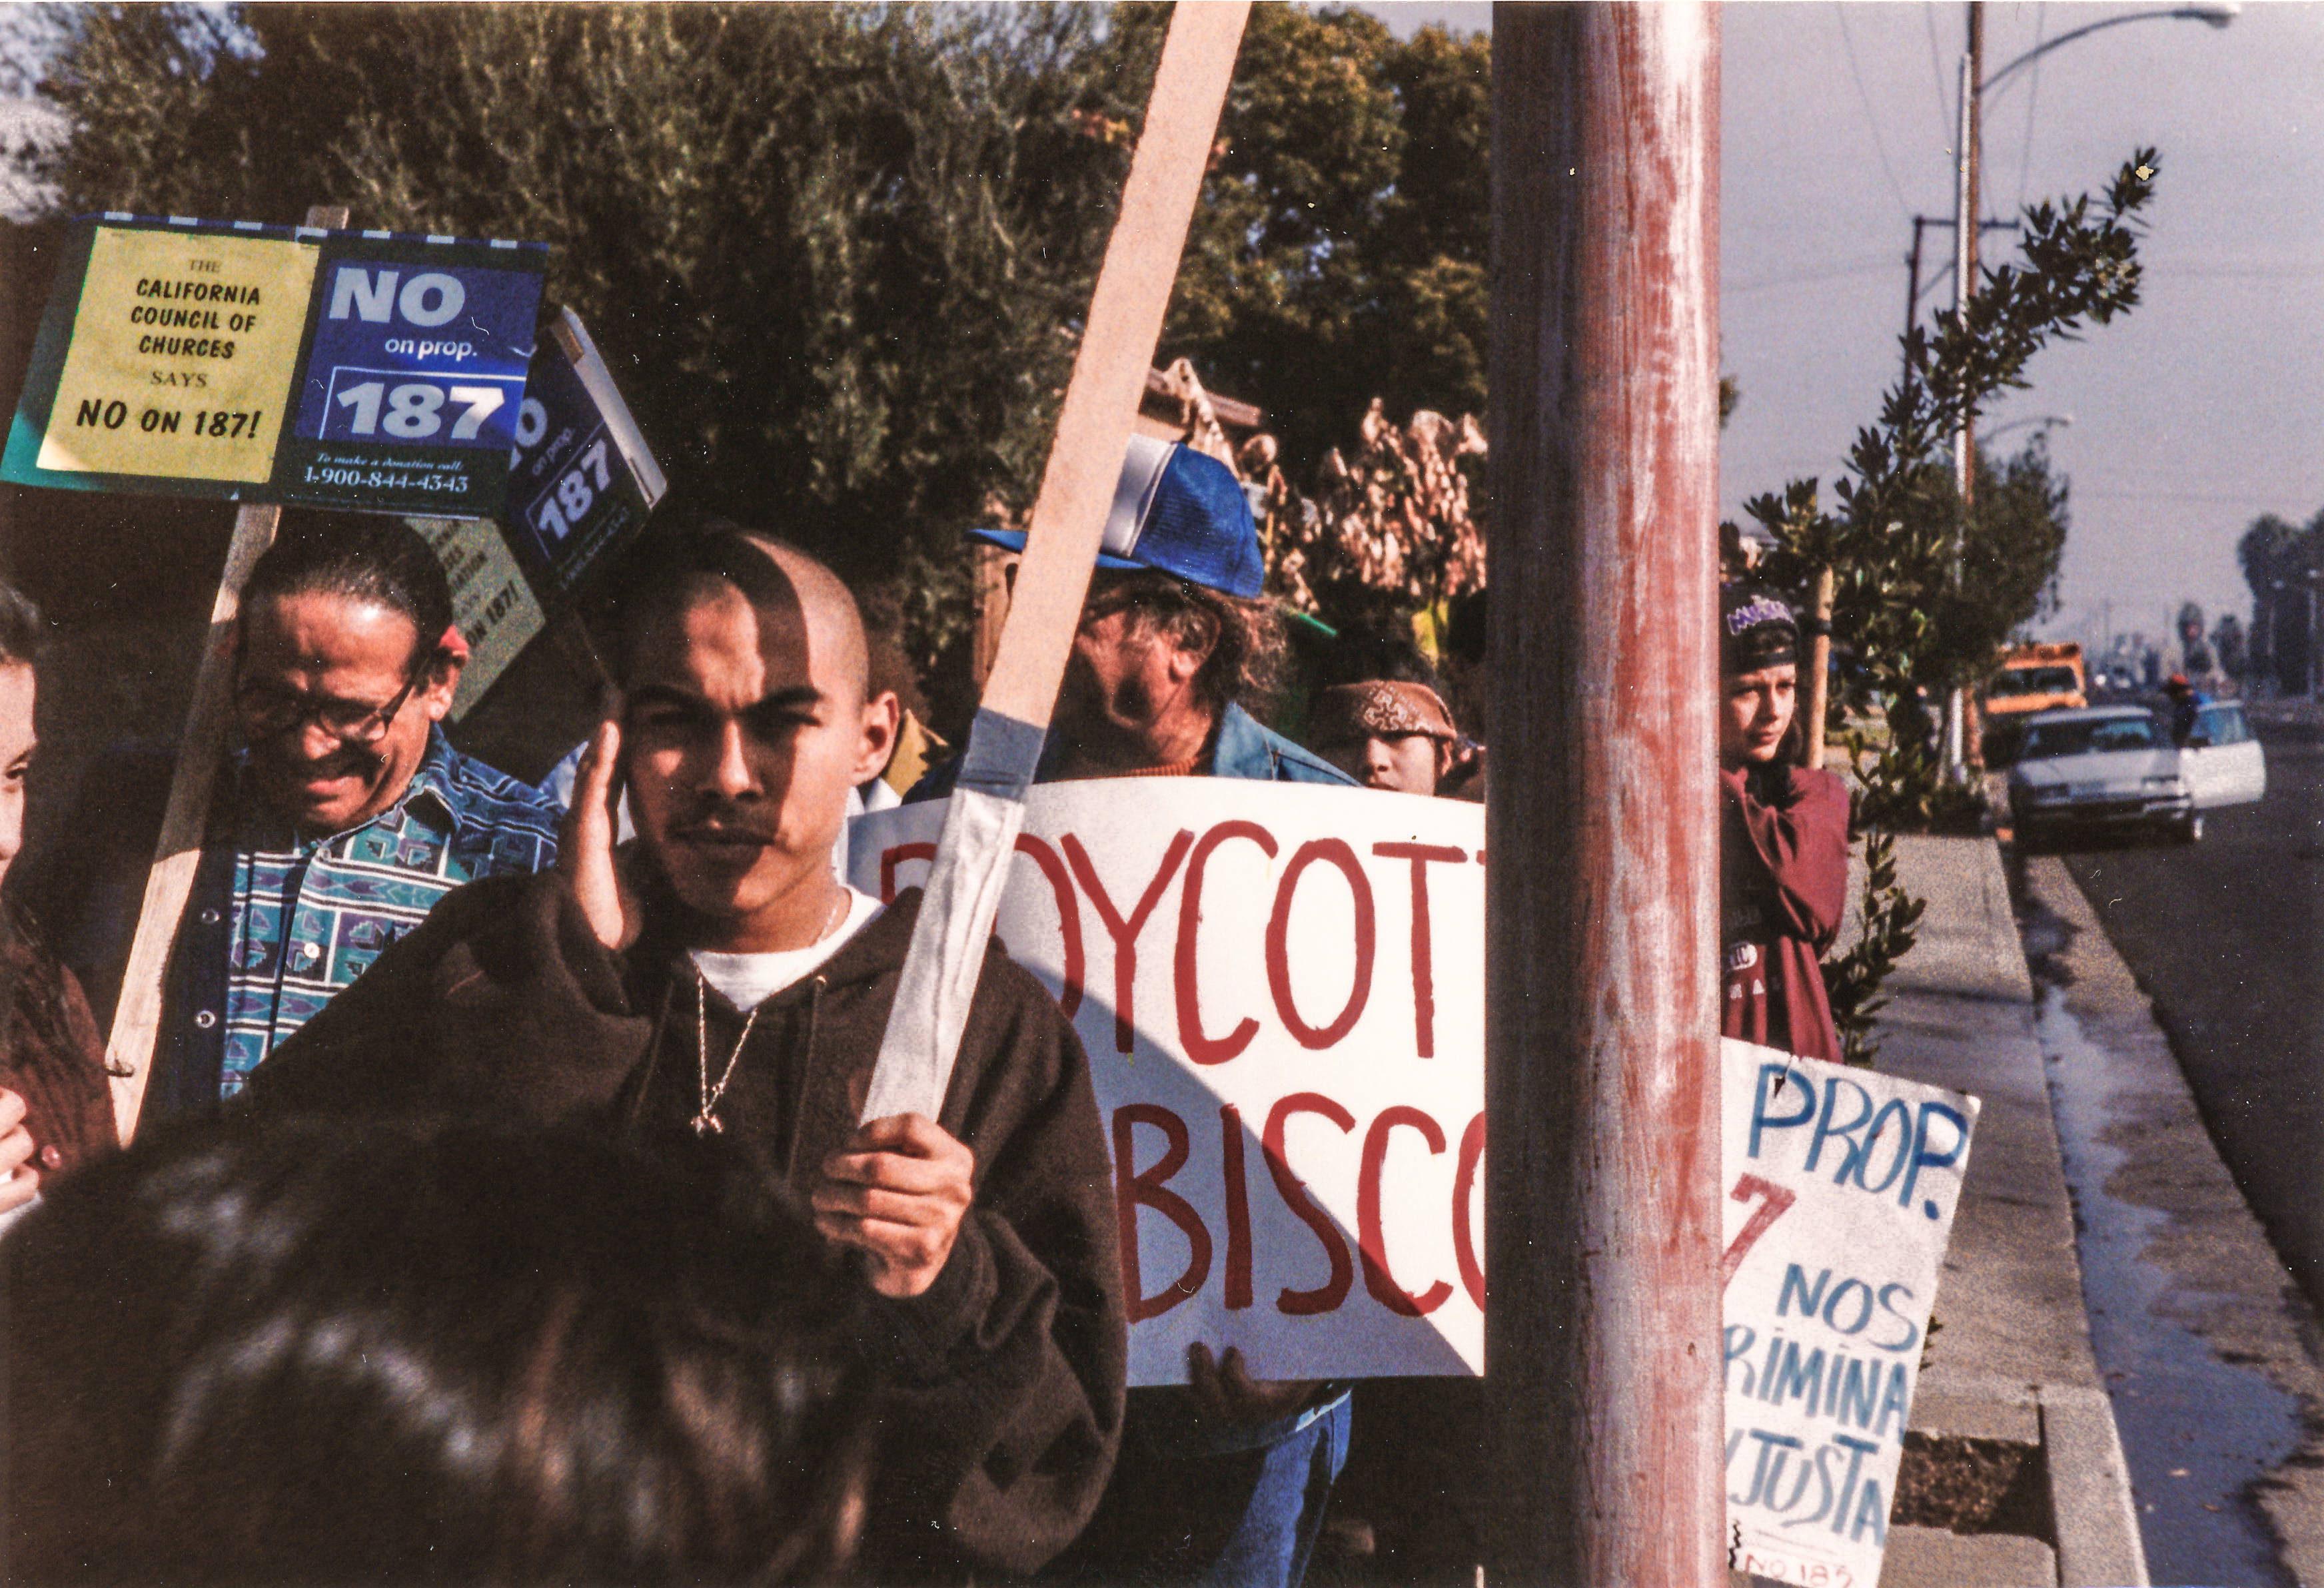 A group of protestors against Prop 187 in Fresno, California